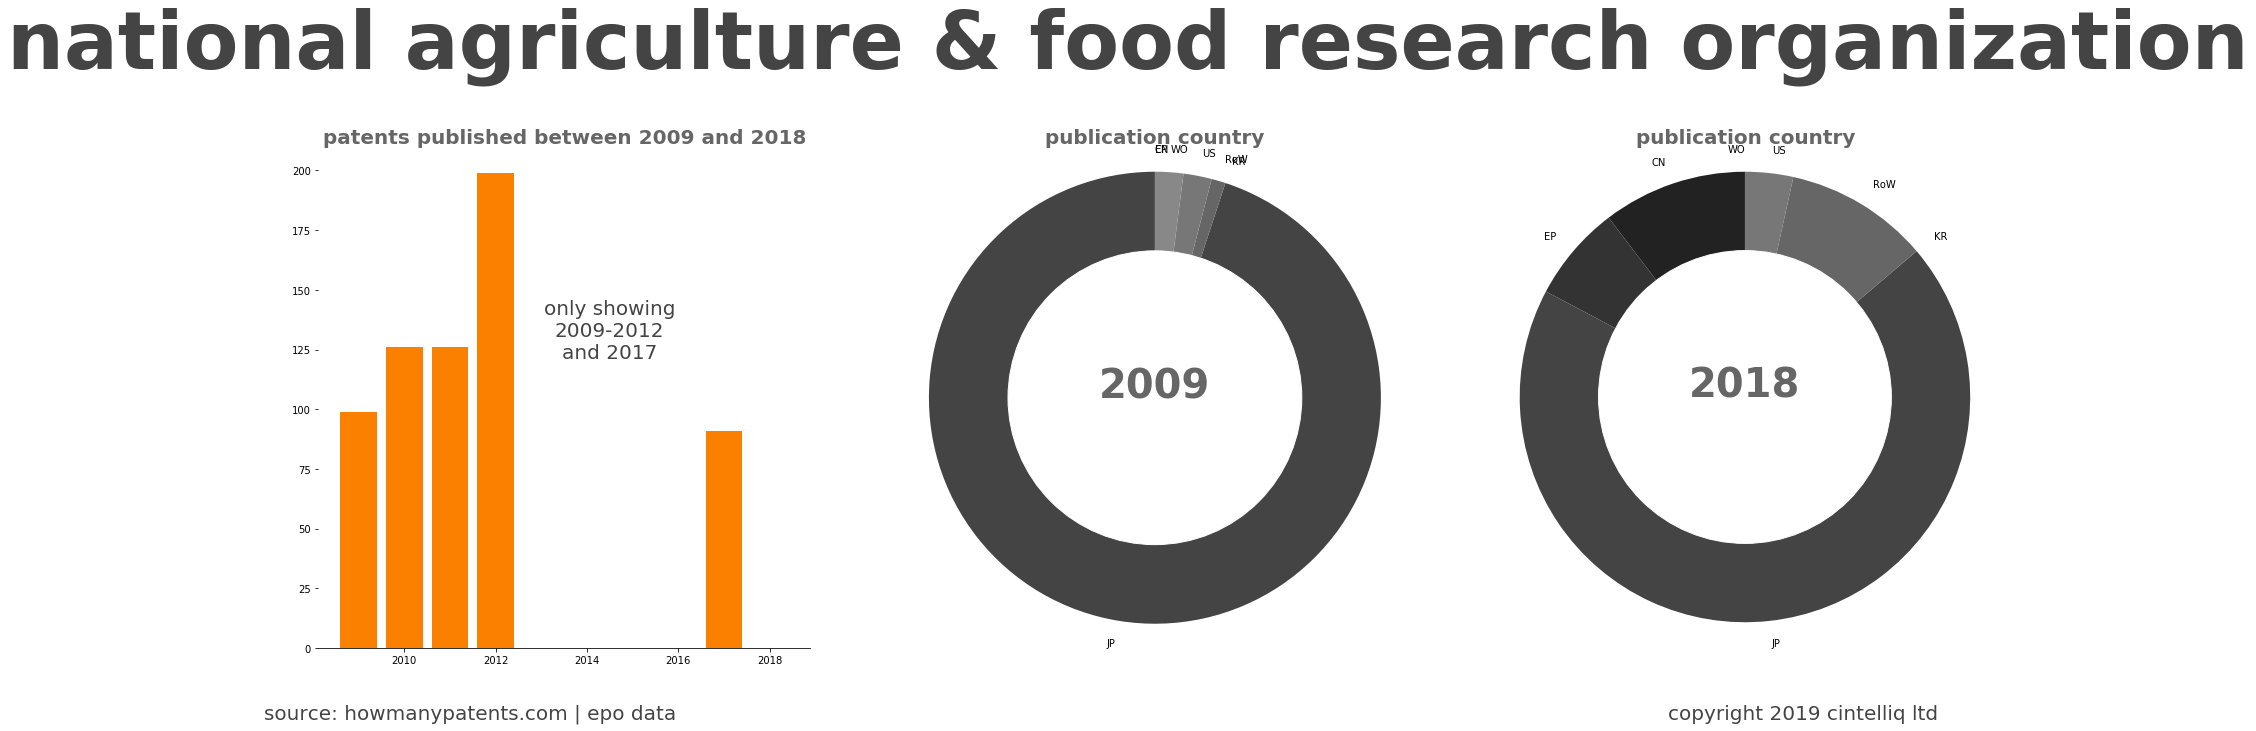 summary of patents for National Agriculture & Food Research Organization